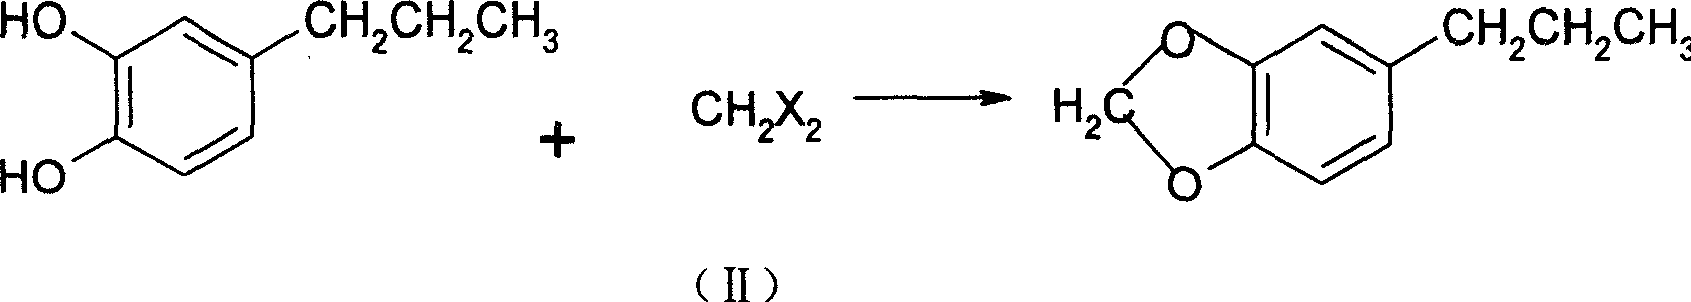 Method for preparing dihydro safrole